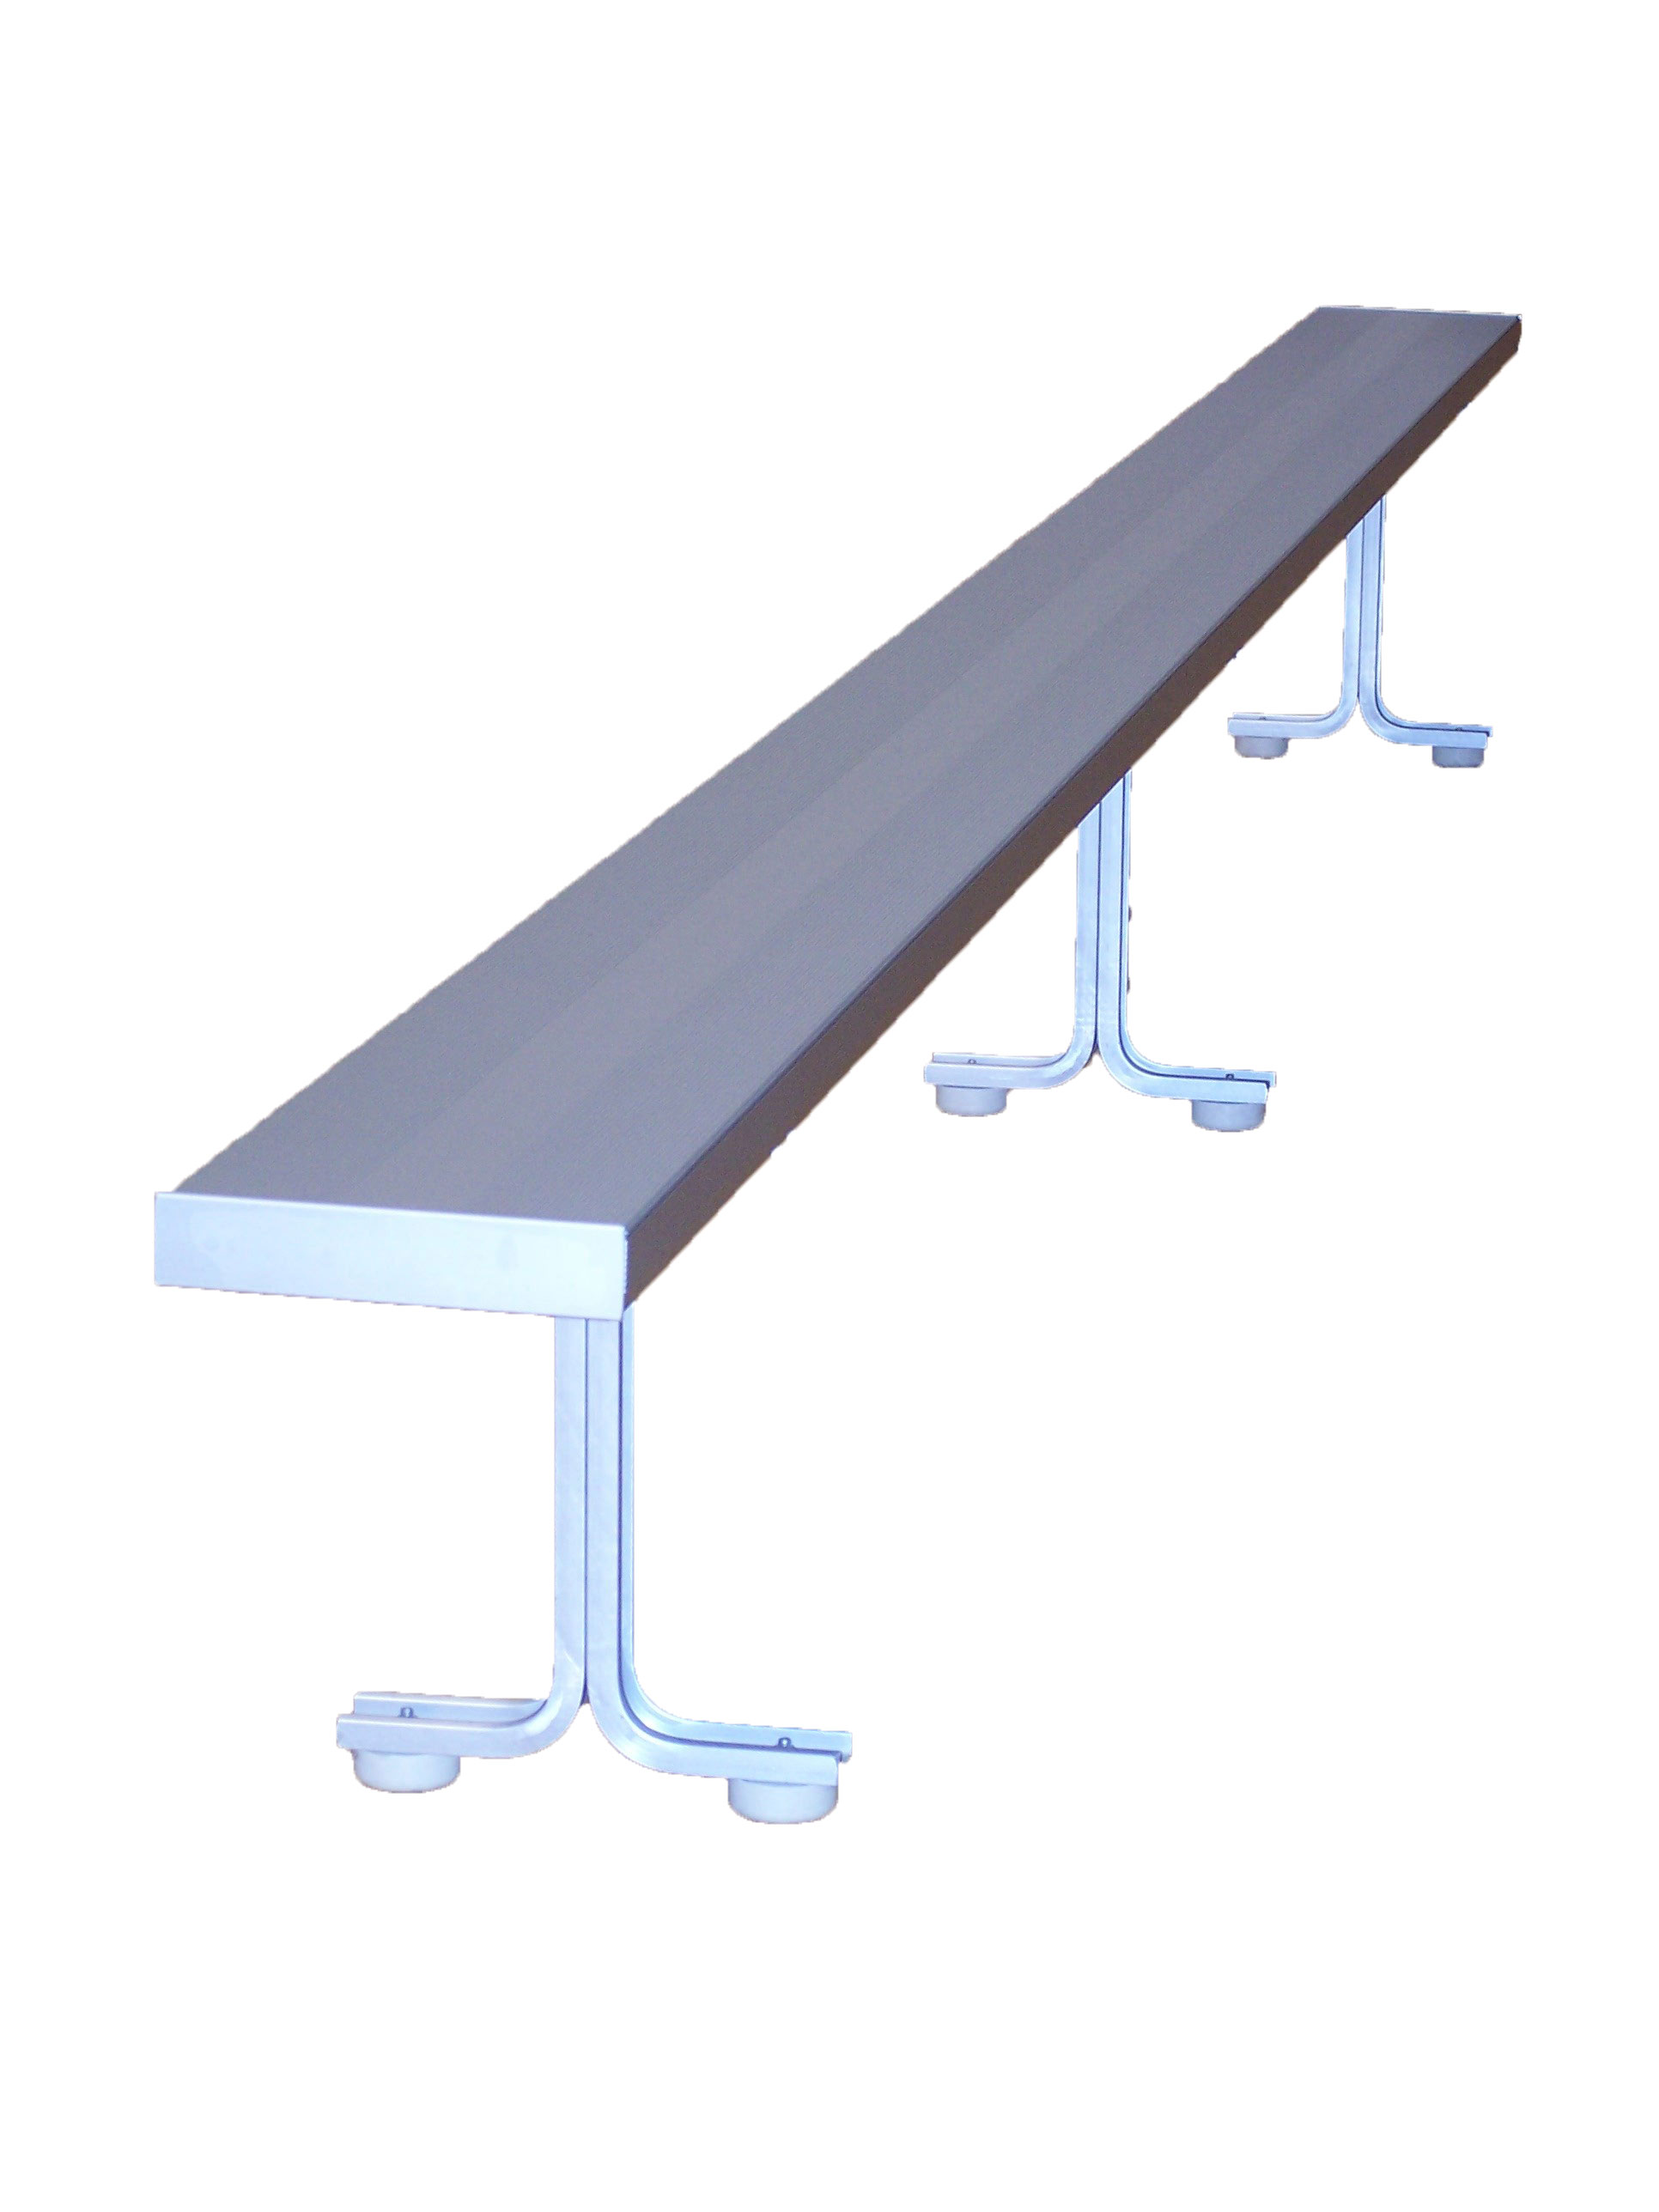 Bench without BackRest - Portable, All Aluminum 